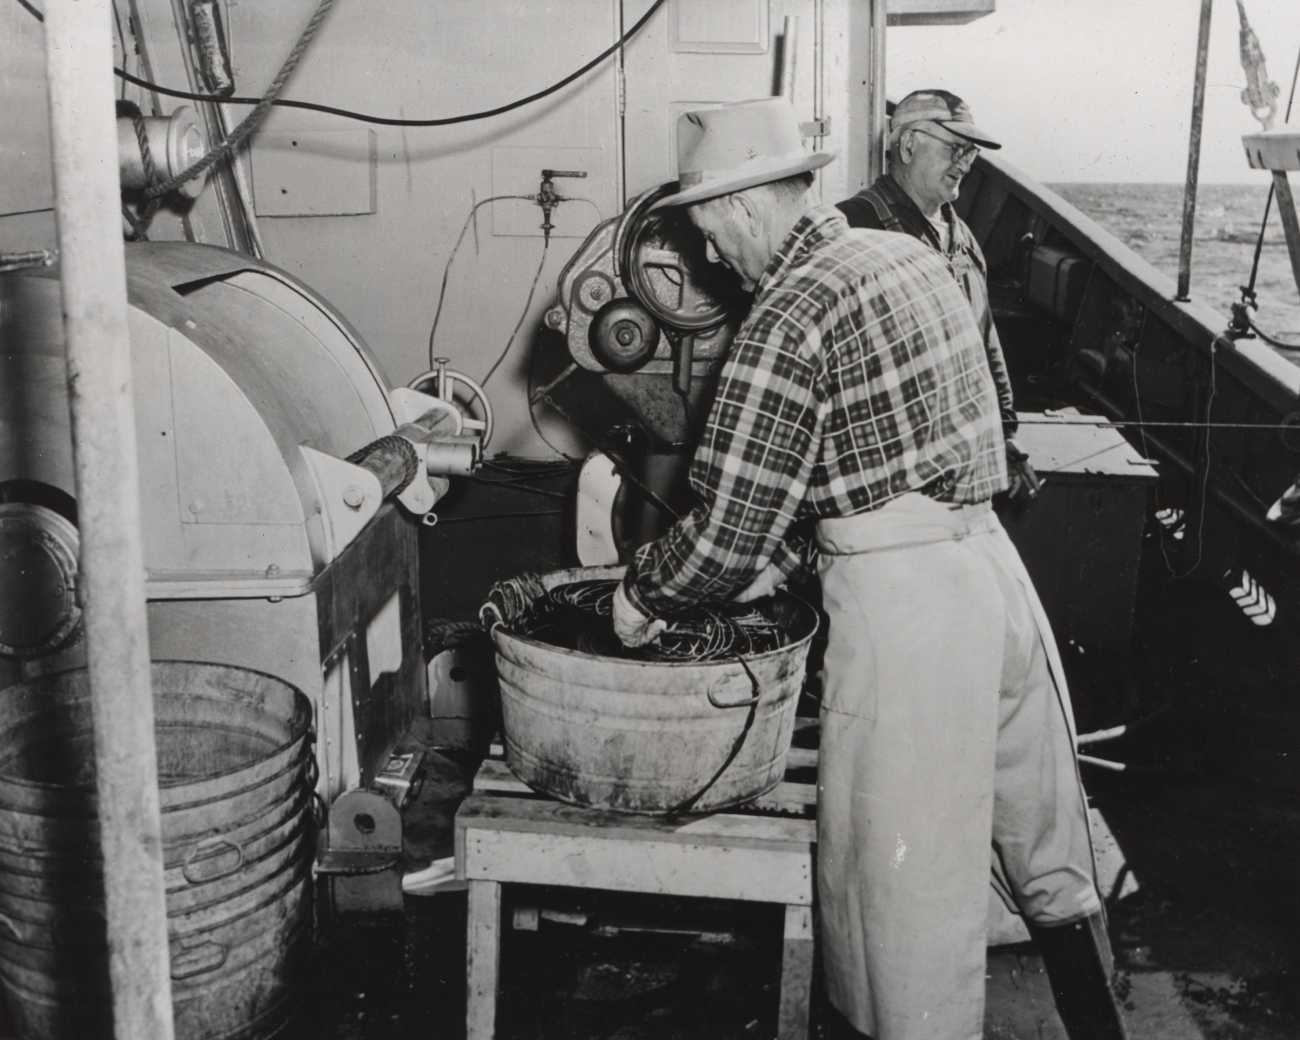 Coiling line on FWS research vessel OREGON - long-lining for tuna